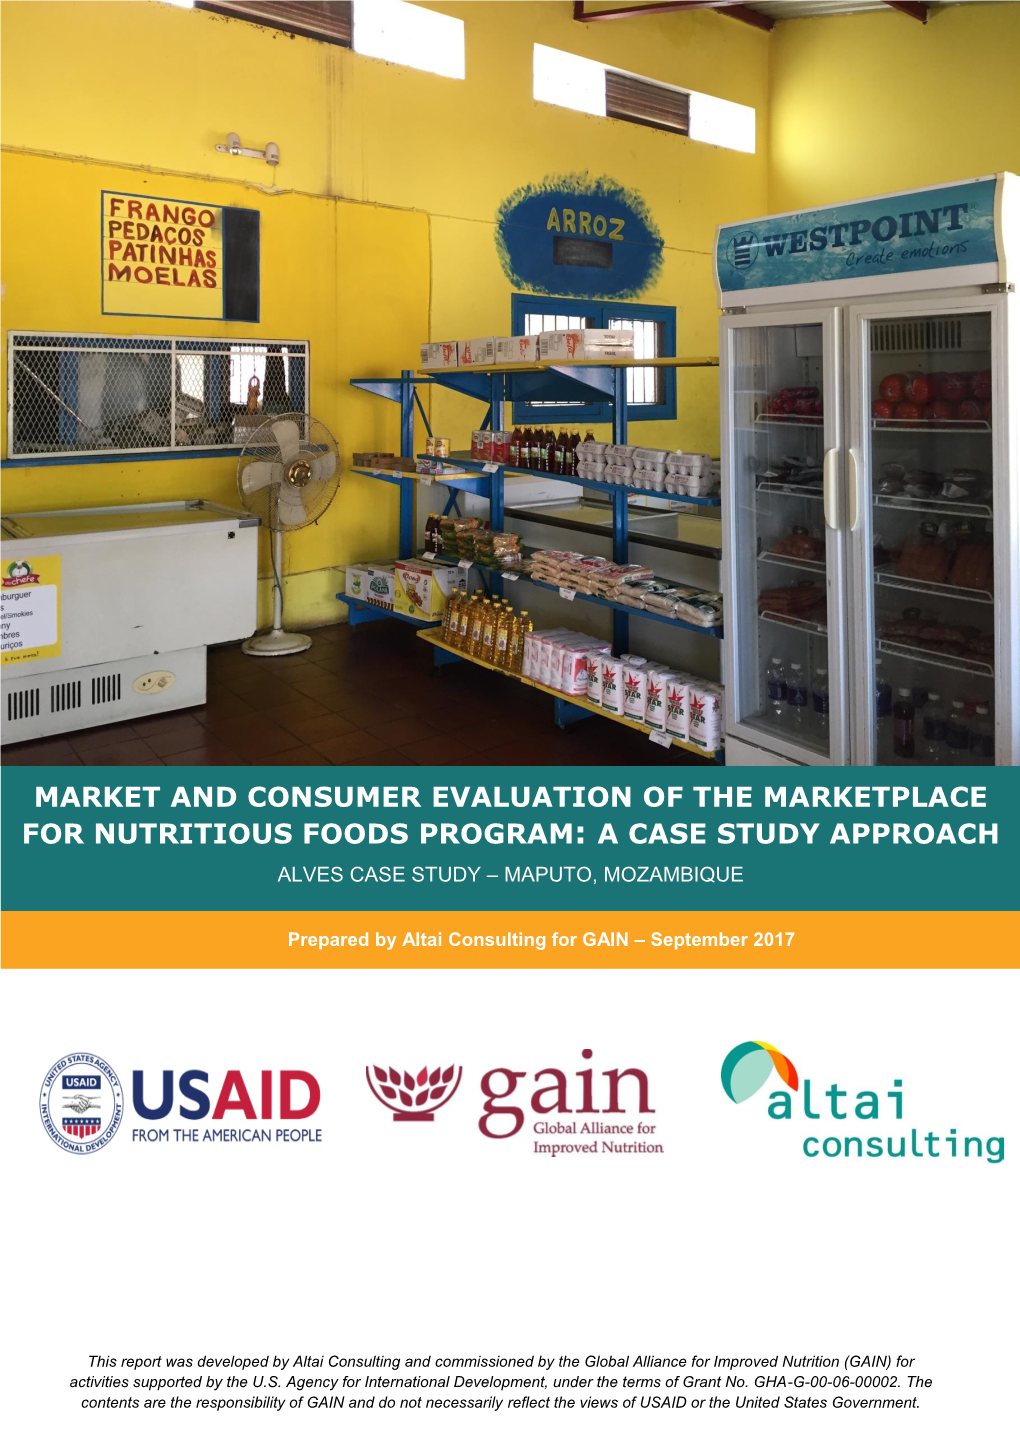 Market and Consumer Evaluation of the Marketplace for Nutritious Foods Program: a Case Study Approach